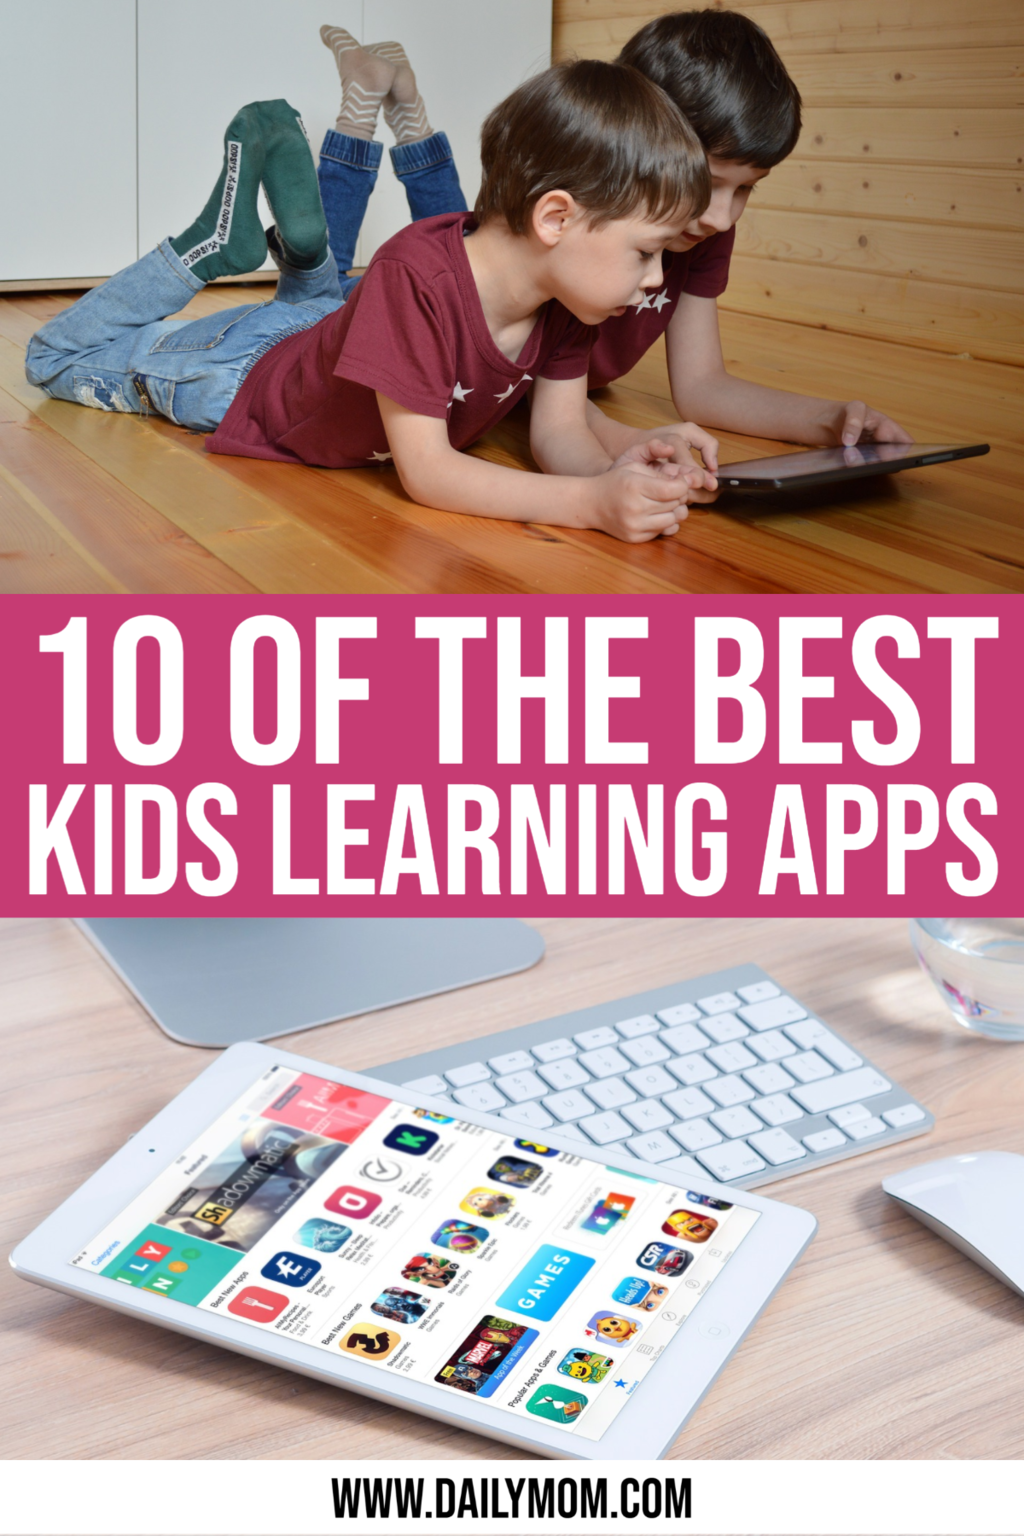 10 Of The Best Kids Learning Apps »Read More